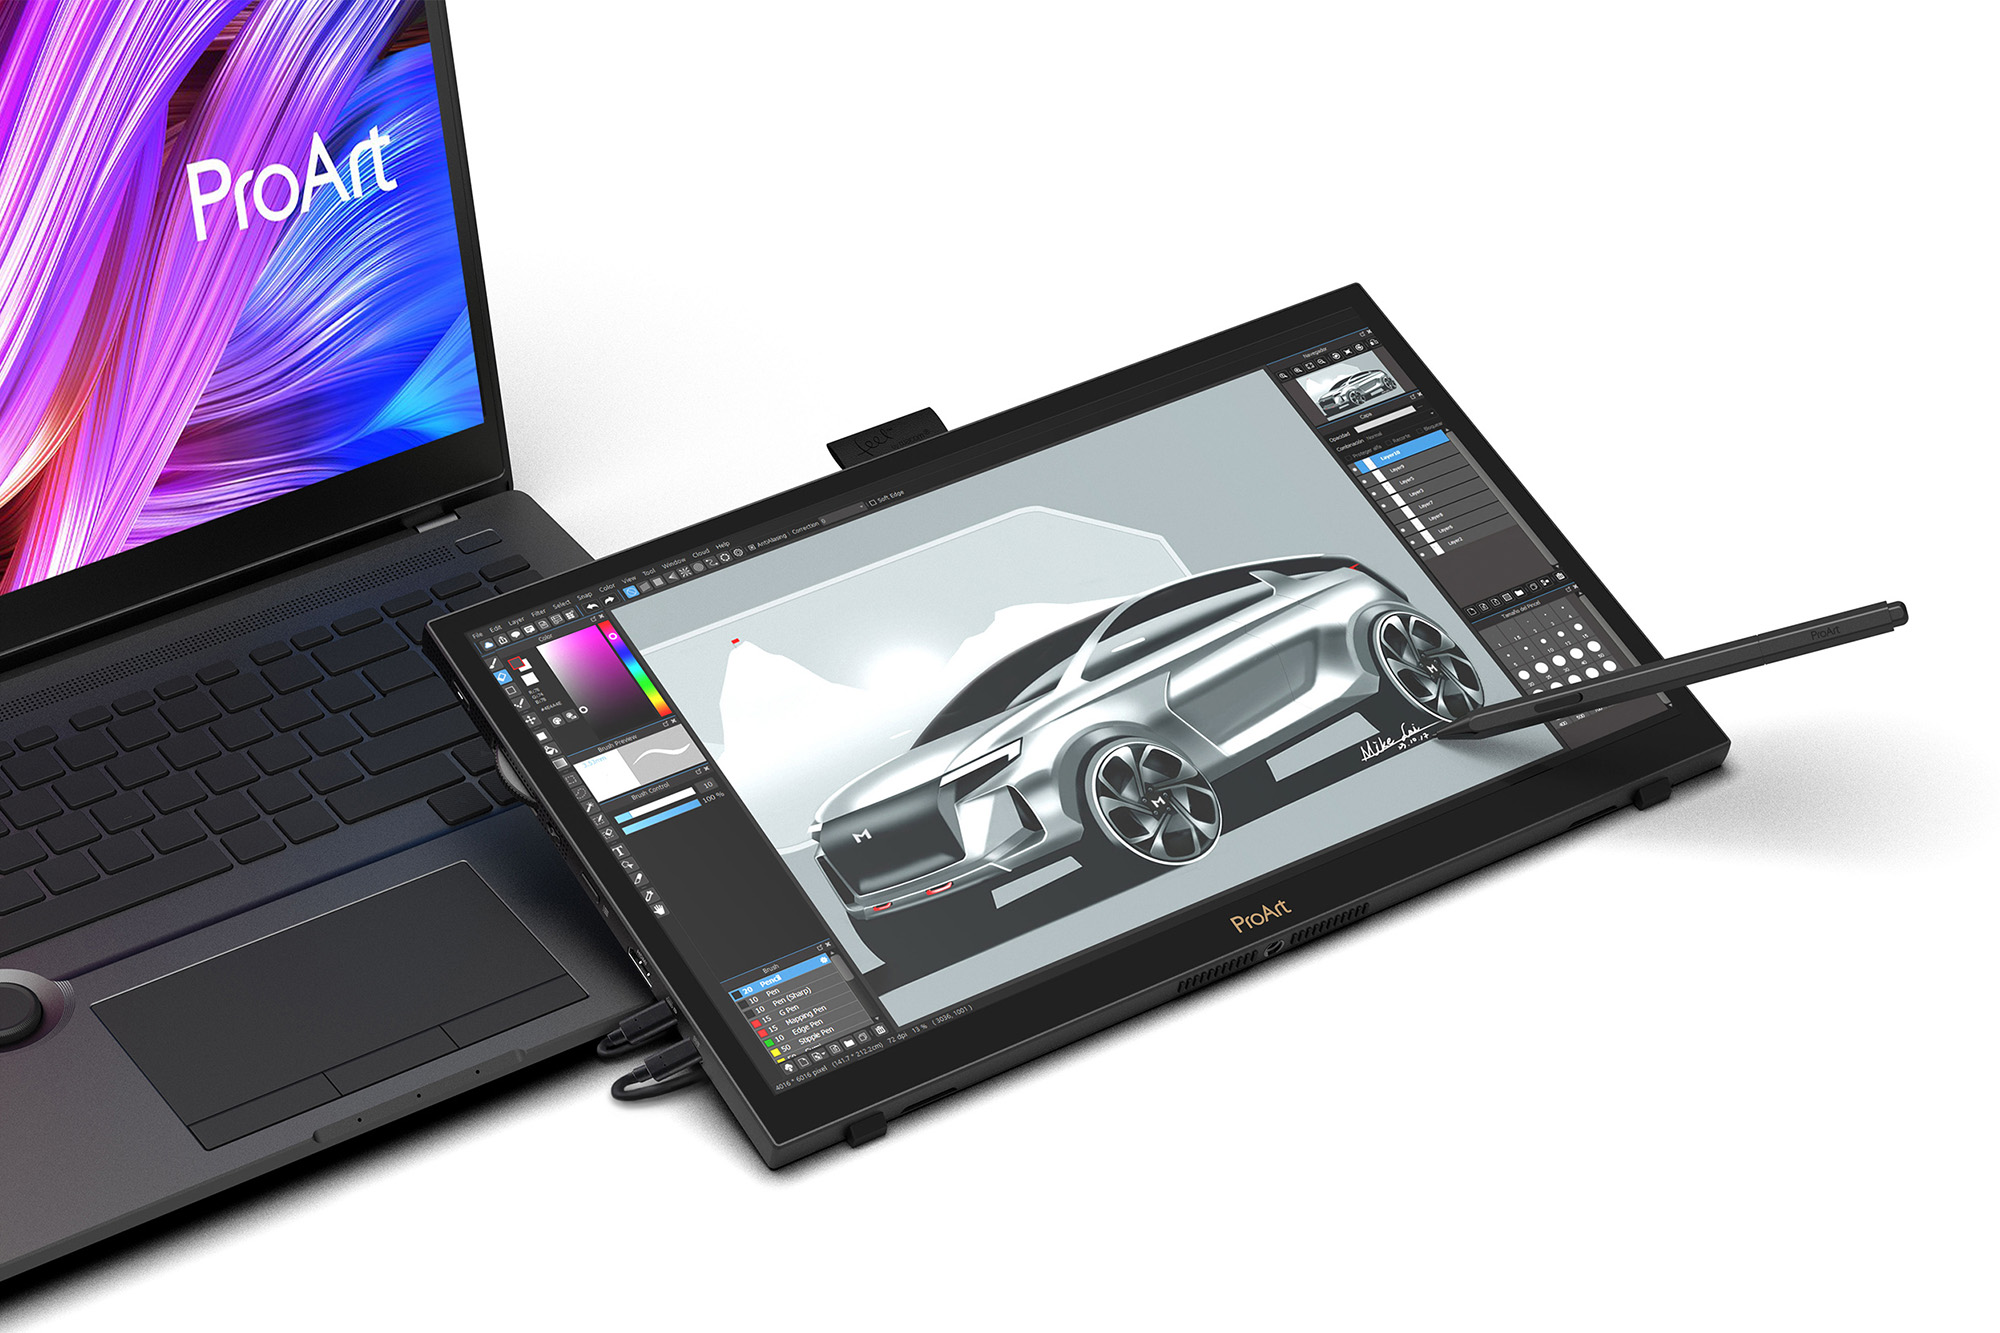 proart_display_pa169cdv_includes_wacom_emr_technology__with_laptop